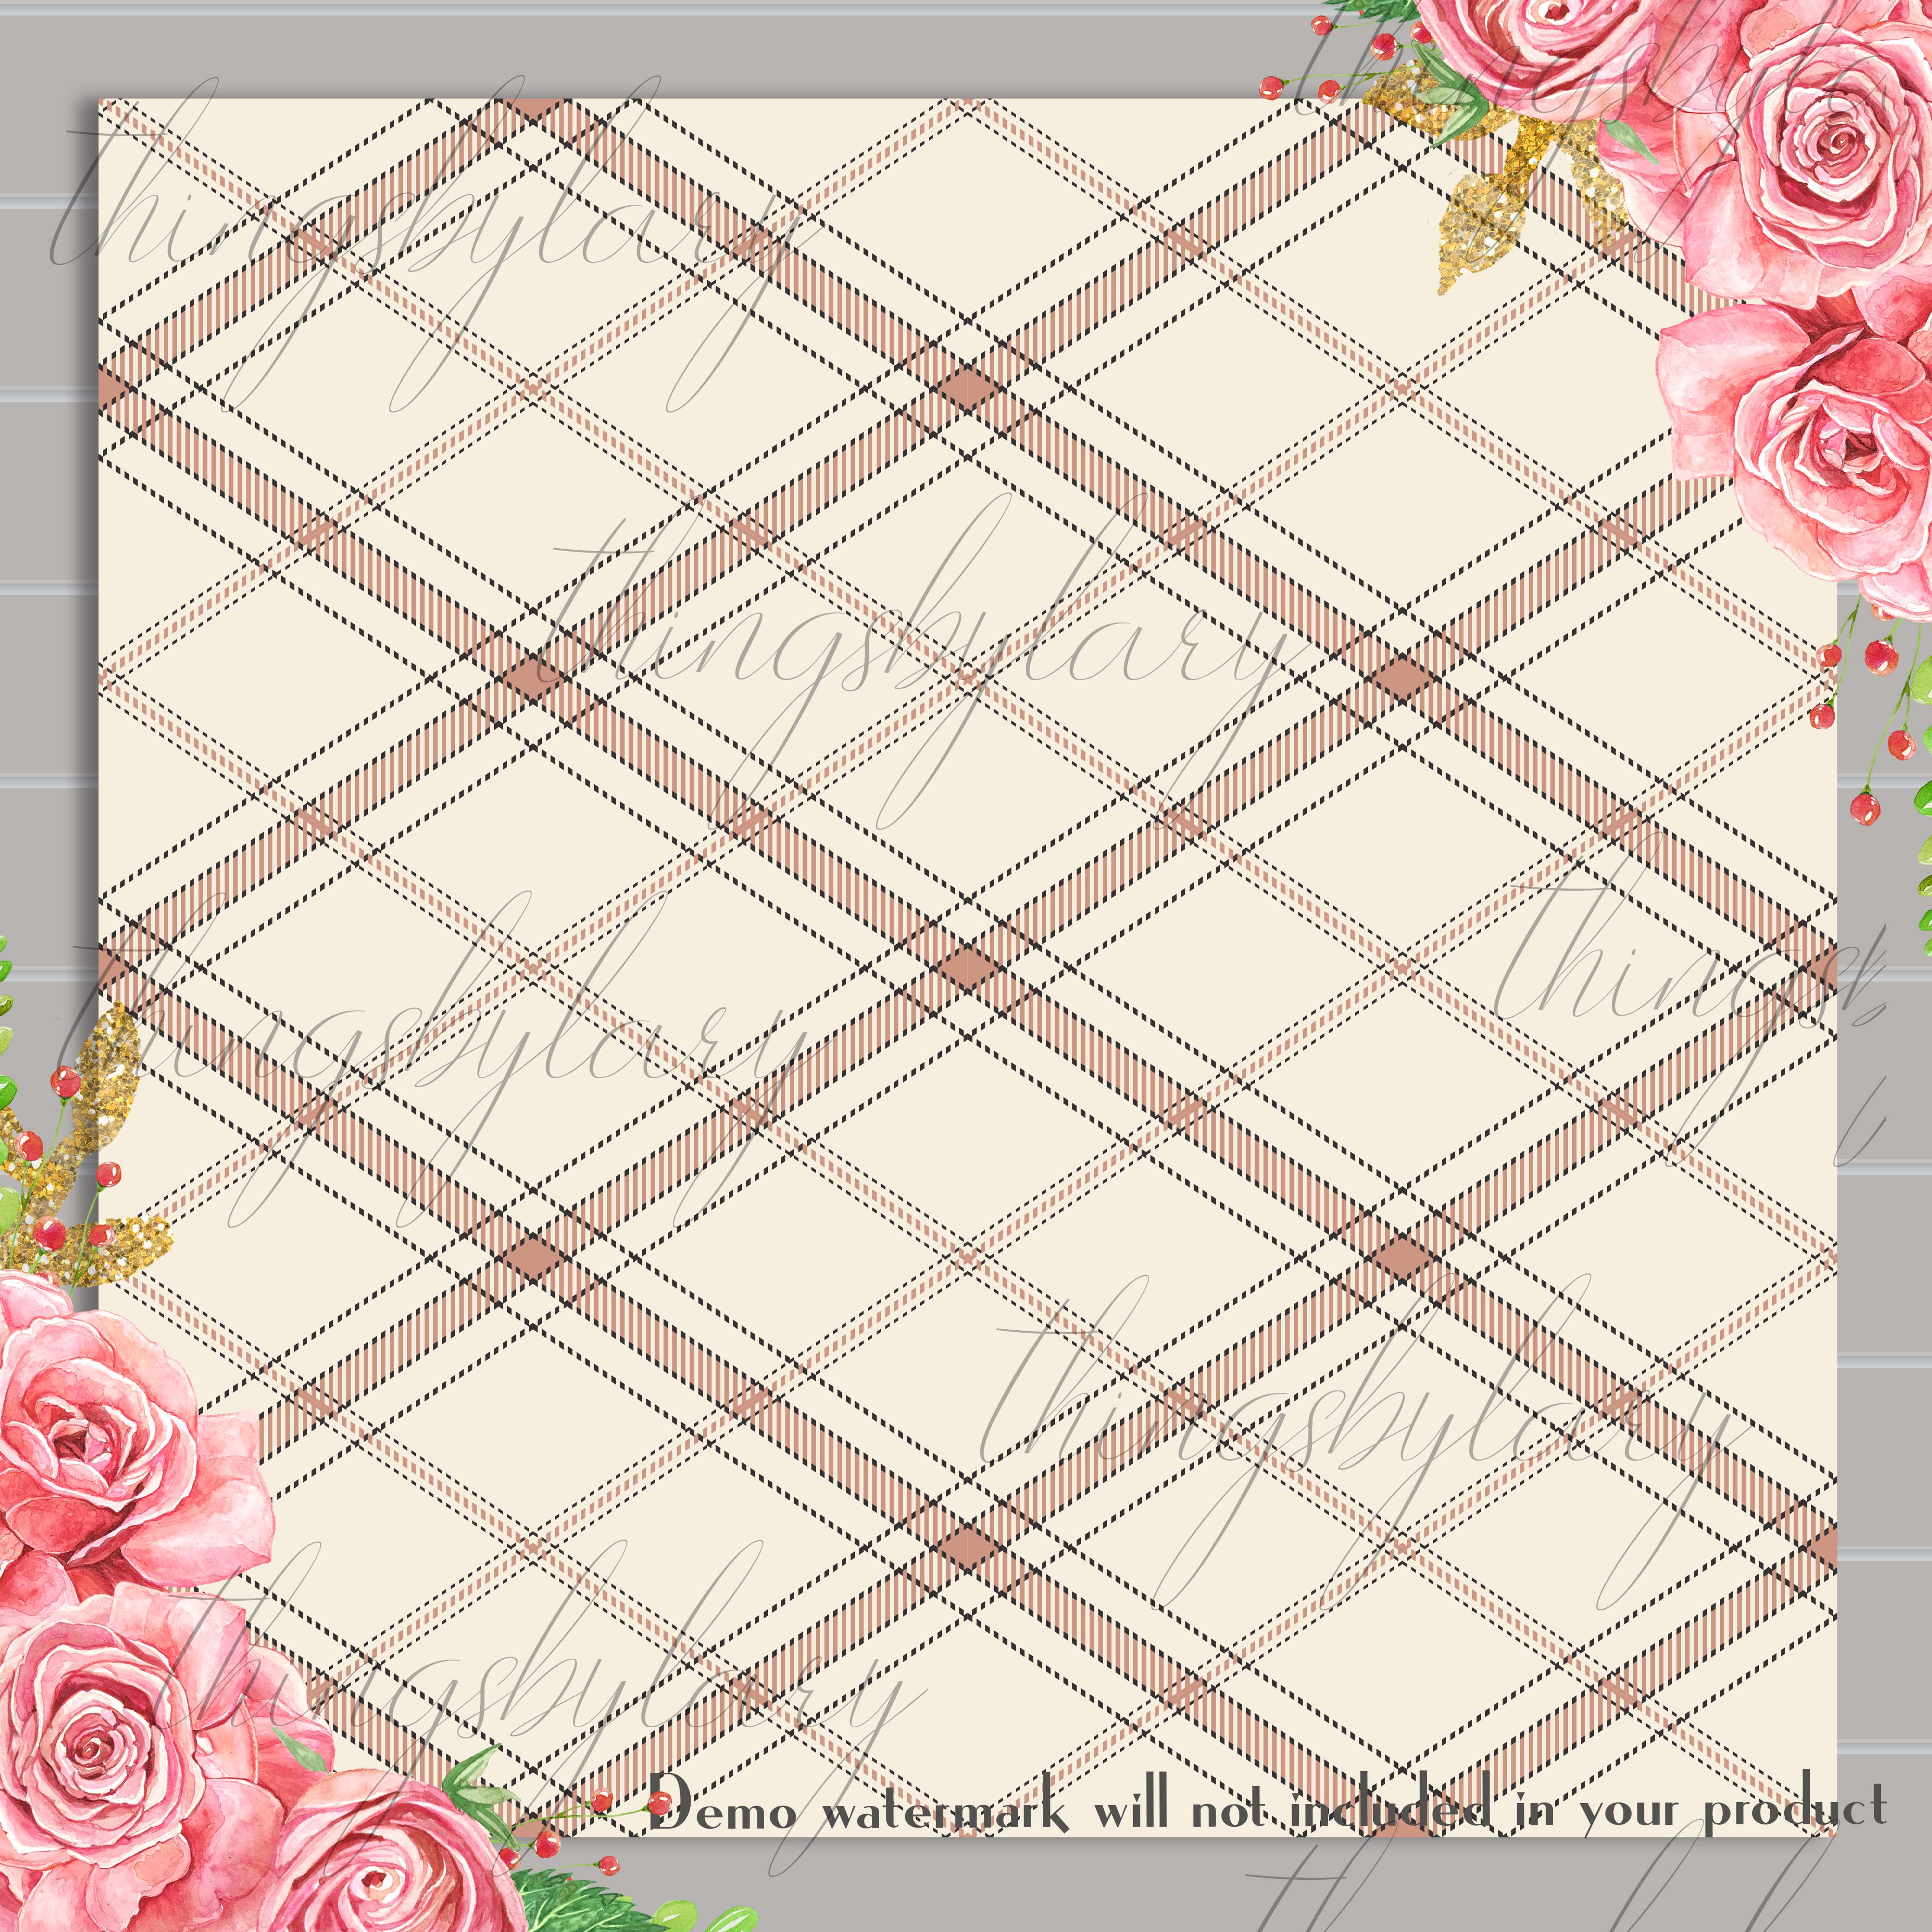 16 Seamless Beige and Burgundy Plaid Digital Papers 12x12